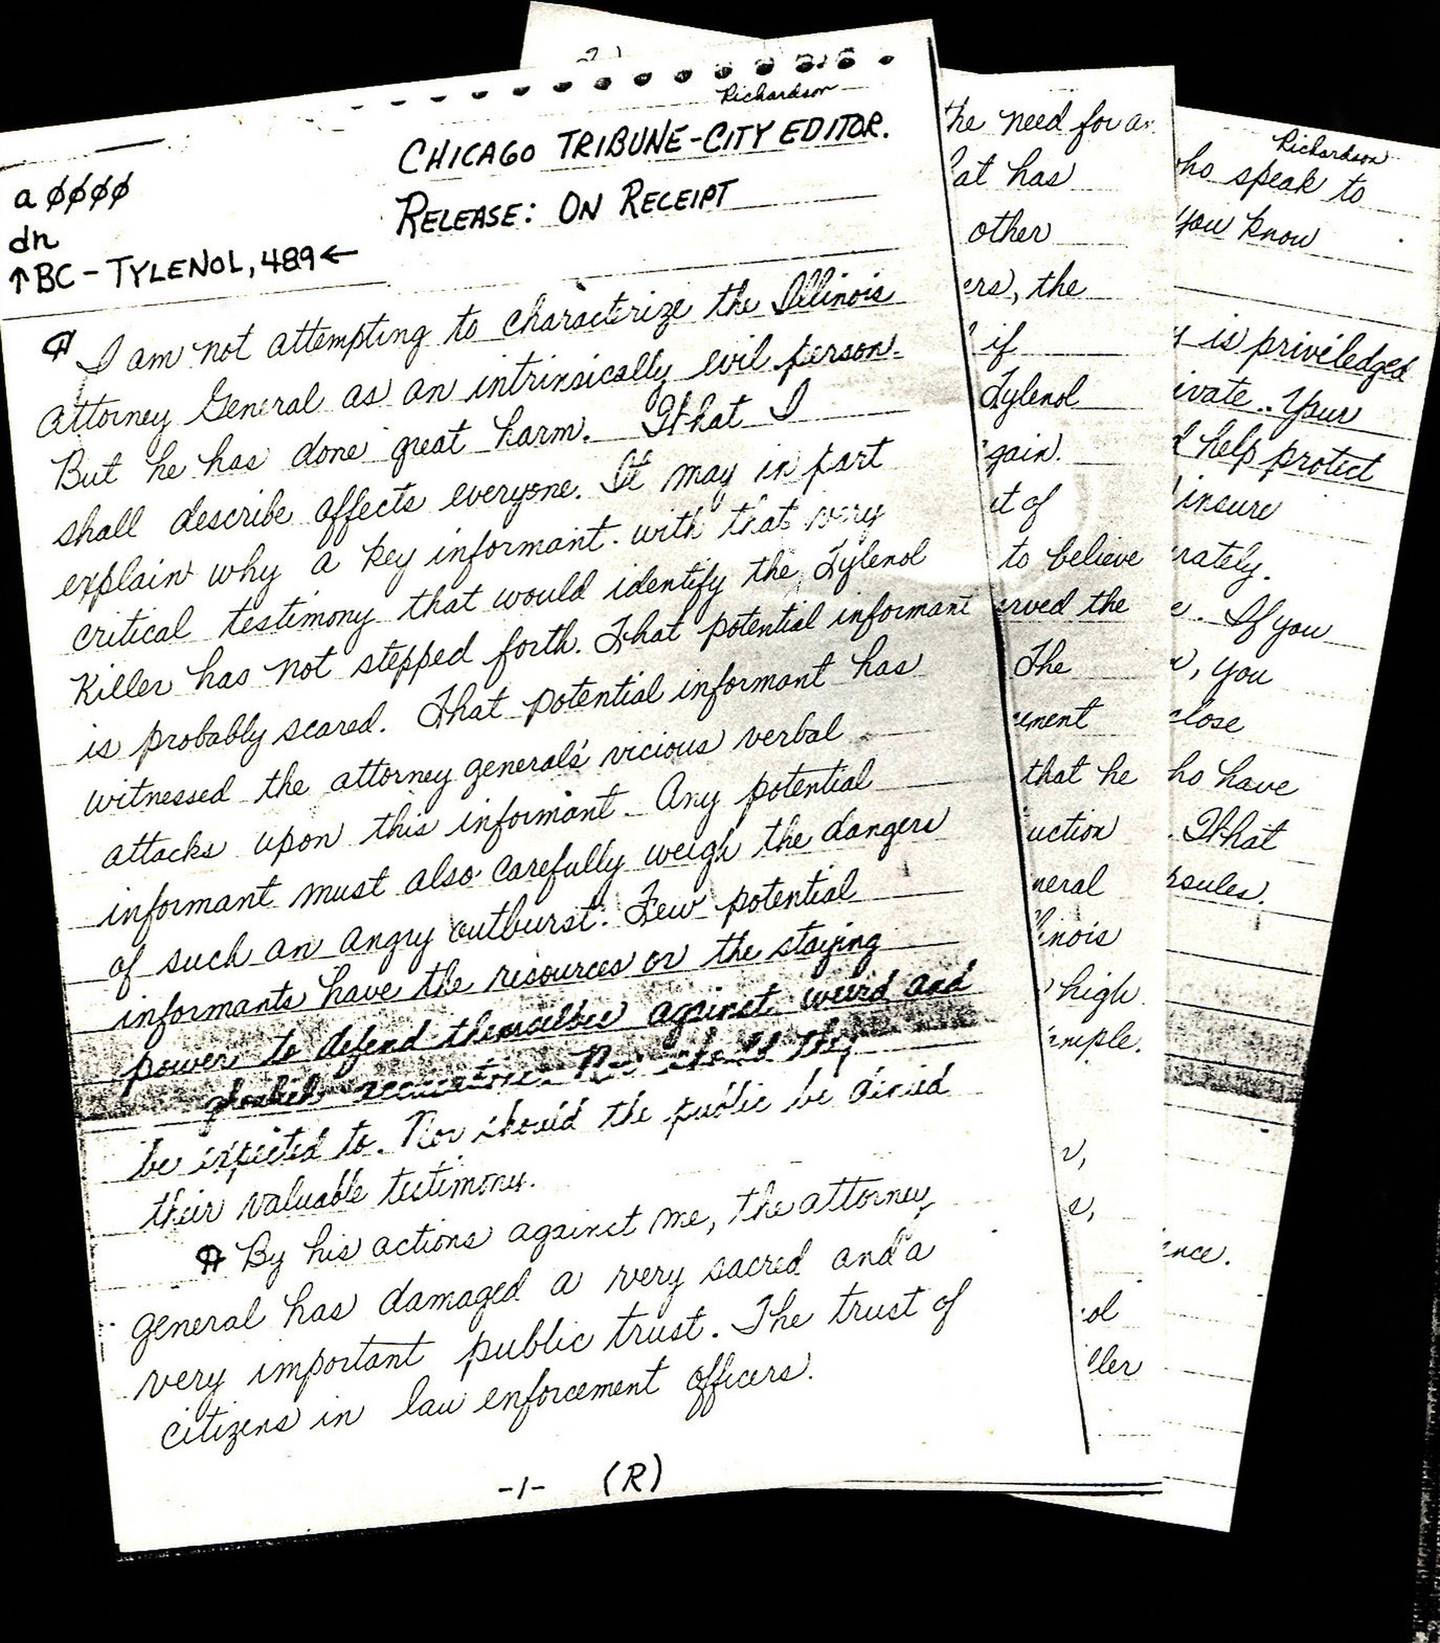 James Lewis sent several letters to the Tribune, including this one. The notations at upper left imitate the story number, slug and computer function symbols that appeared on stories distributed by news wire services.